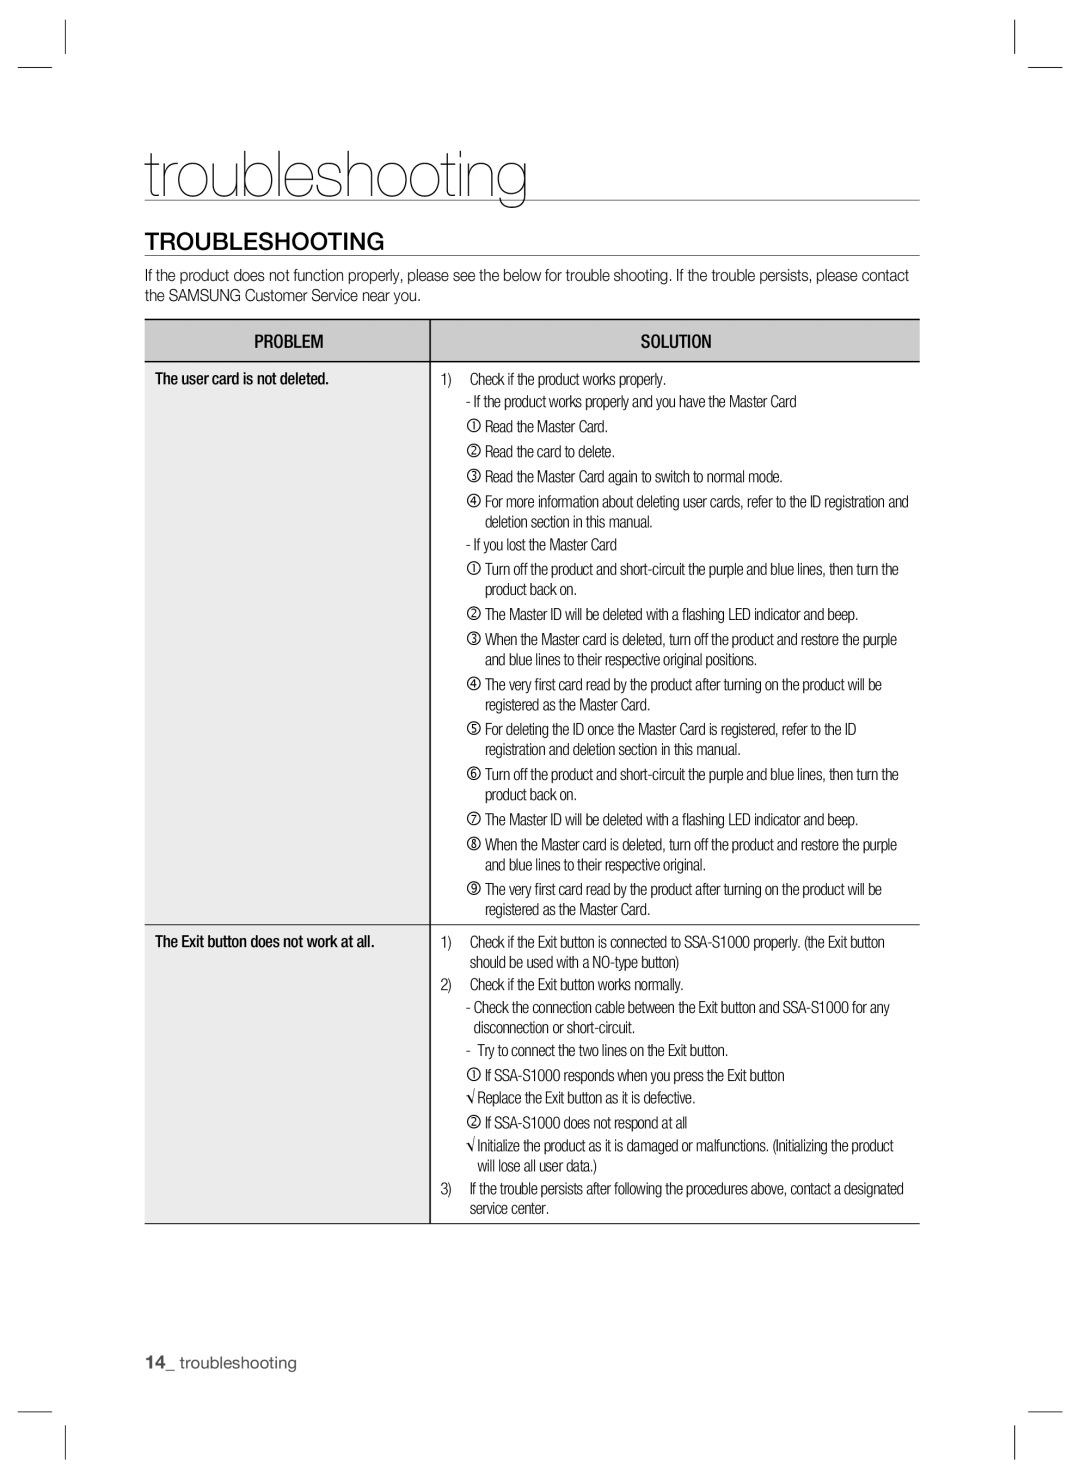 Samsung SSA-S1000 user manual Troubleshooting, 14_ troubleshooting 